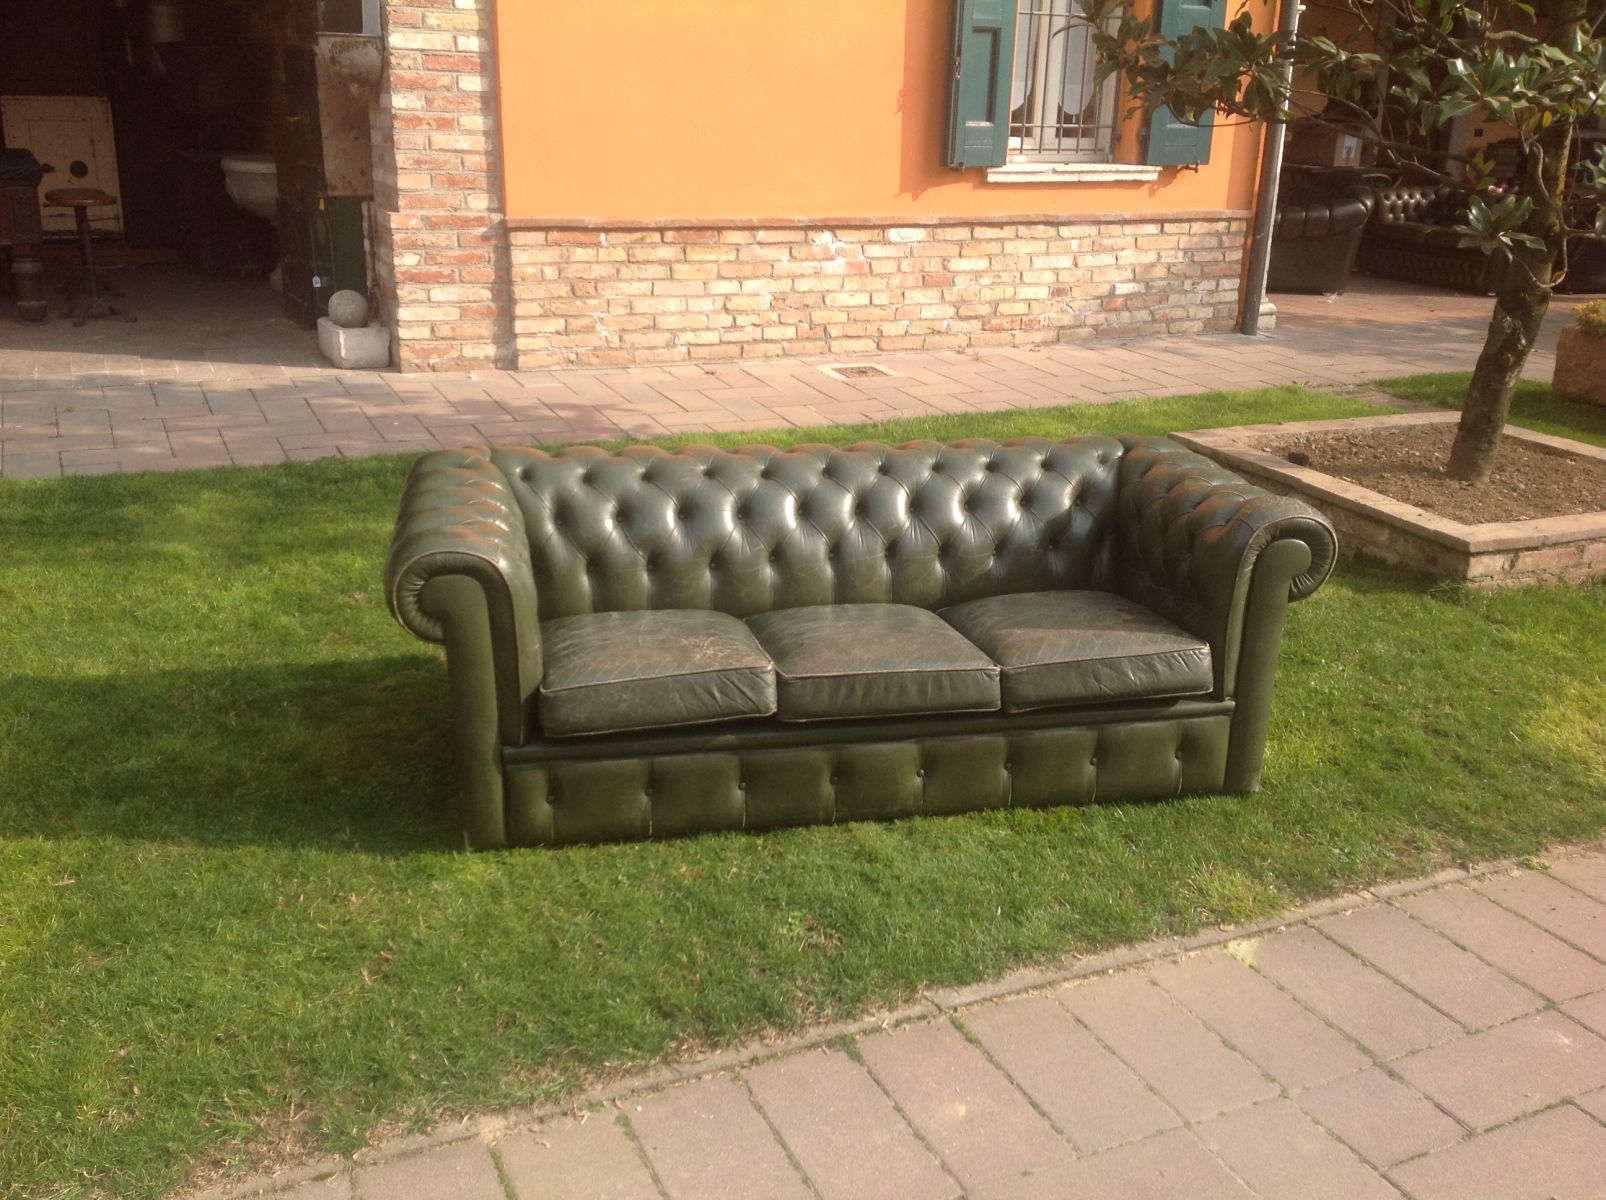 English vintage Chesterfield 3 seater sofa in genuine green leather img_0482.jpg